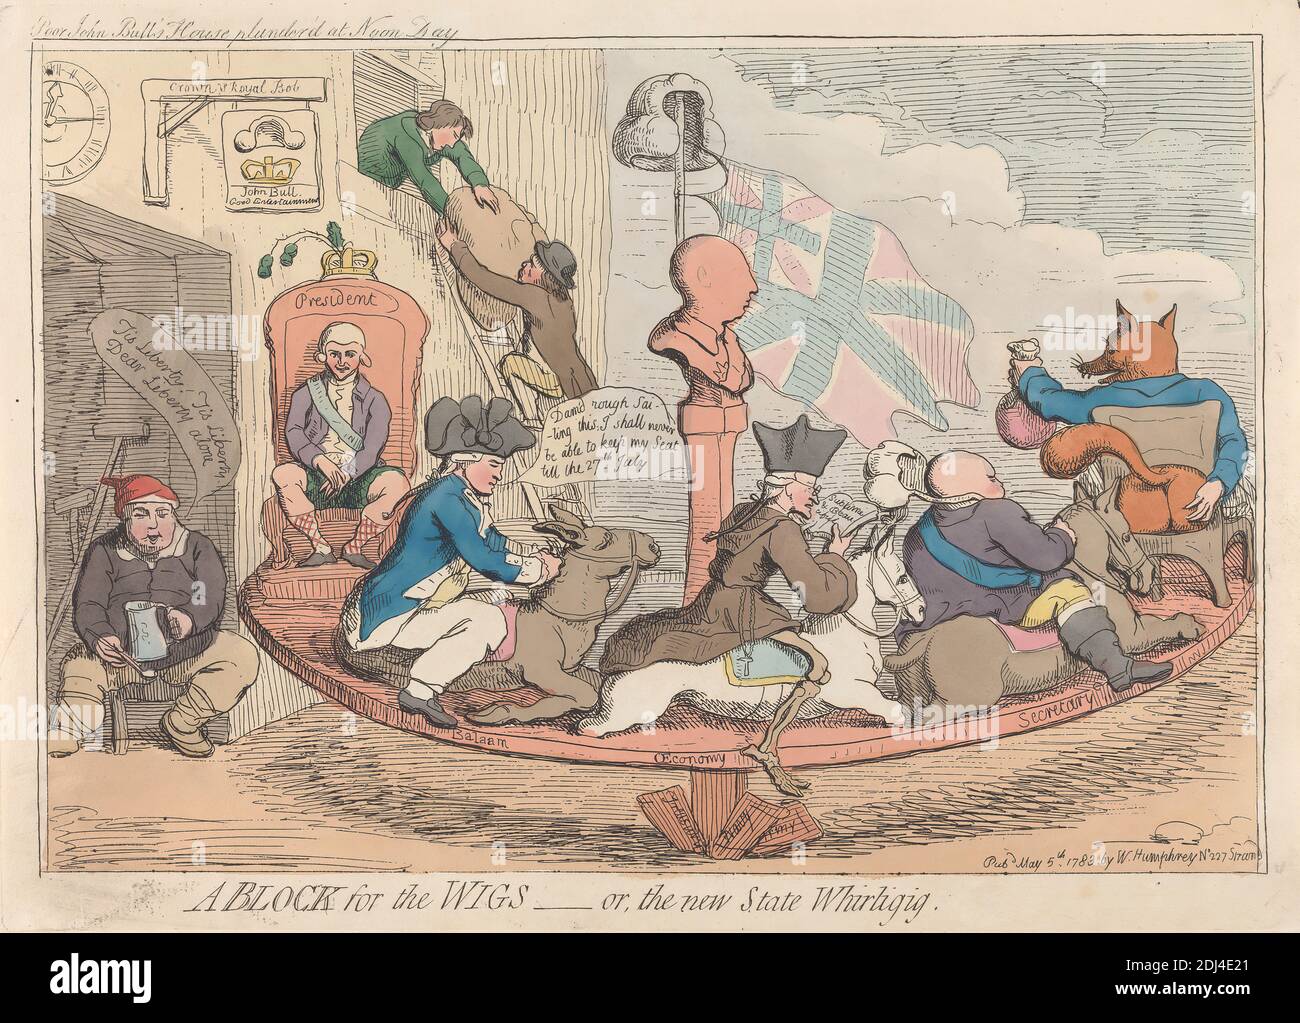 A Block for the Whigs - or, The New State Whirligig (Poor John Bull's House pillé à Noon Day), James Gillray, 1757–1815, British, 1783, Etching Banque D'Images